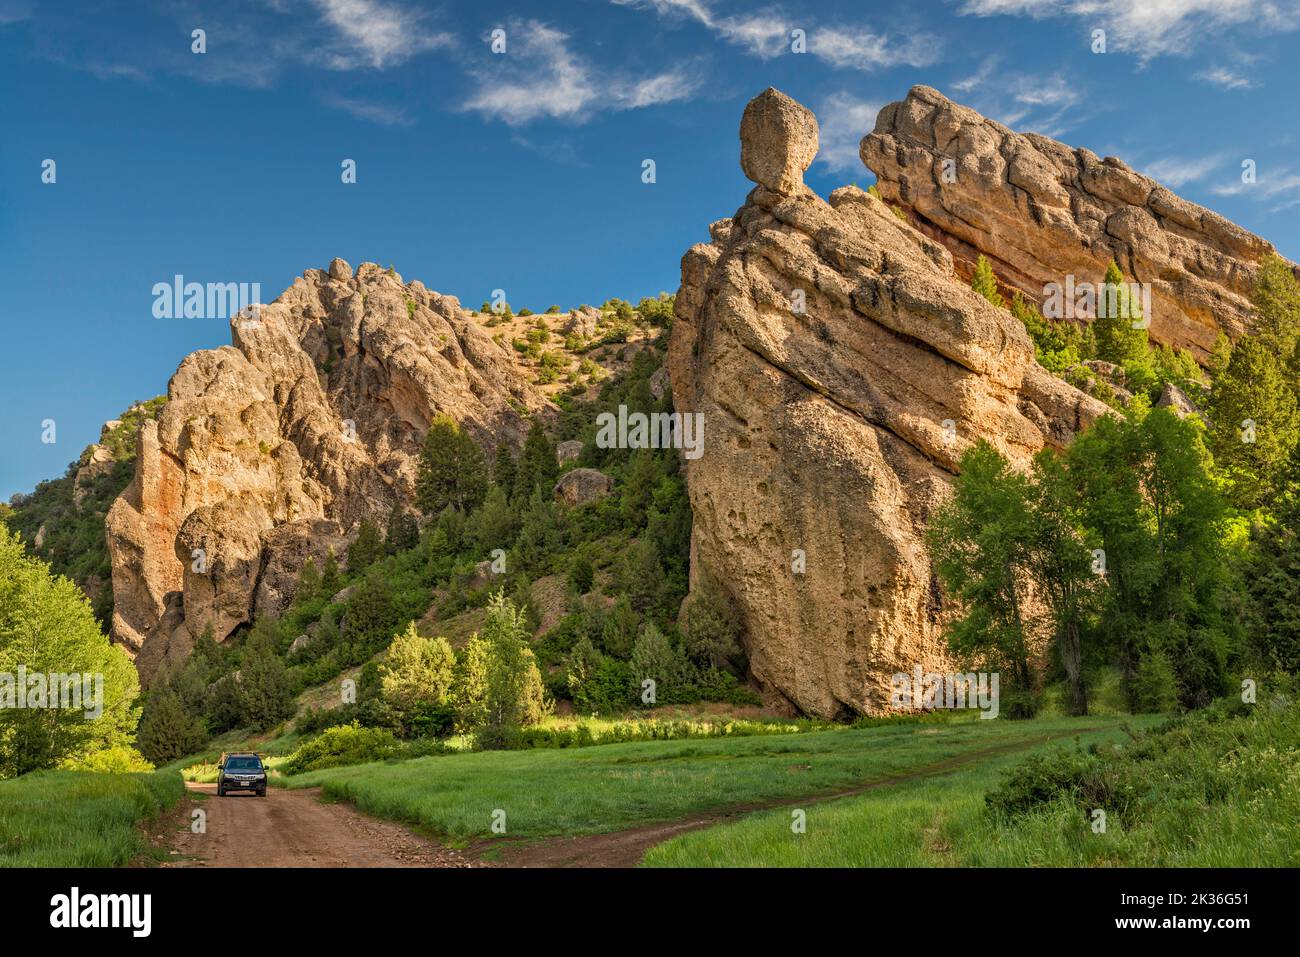 Conglomerate rocks, Reddick Canyon, Chicken Creek Road, FR 101, San Pitch Mountains, Uinta National Forest, Utah, USA Stock Photo